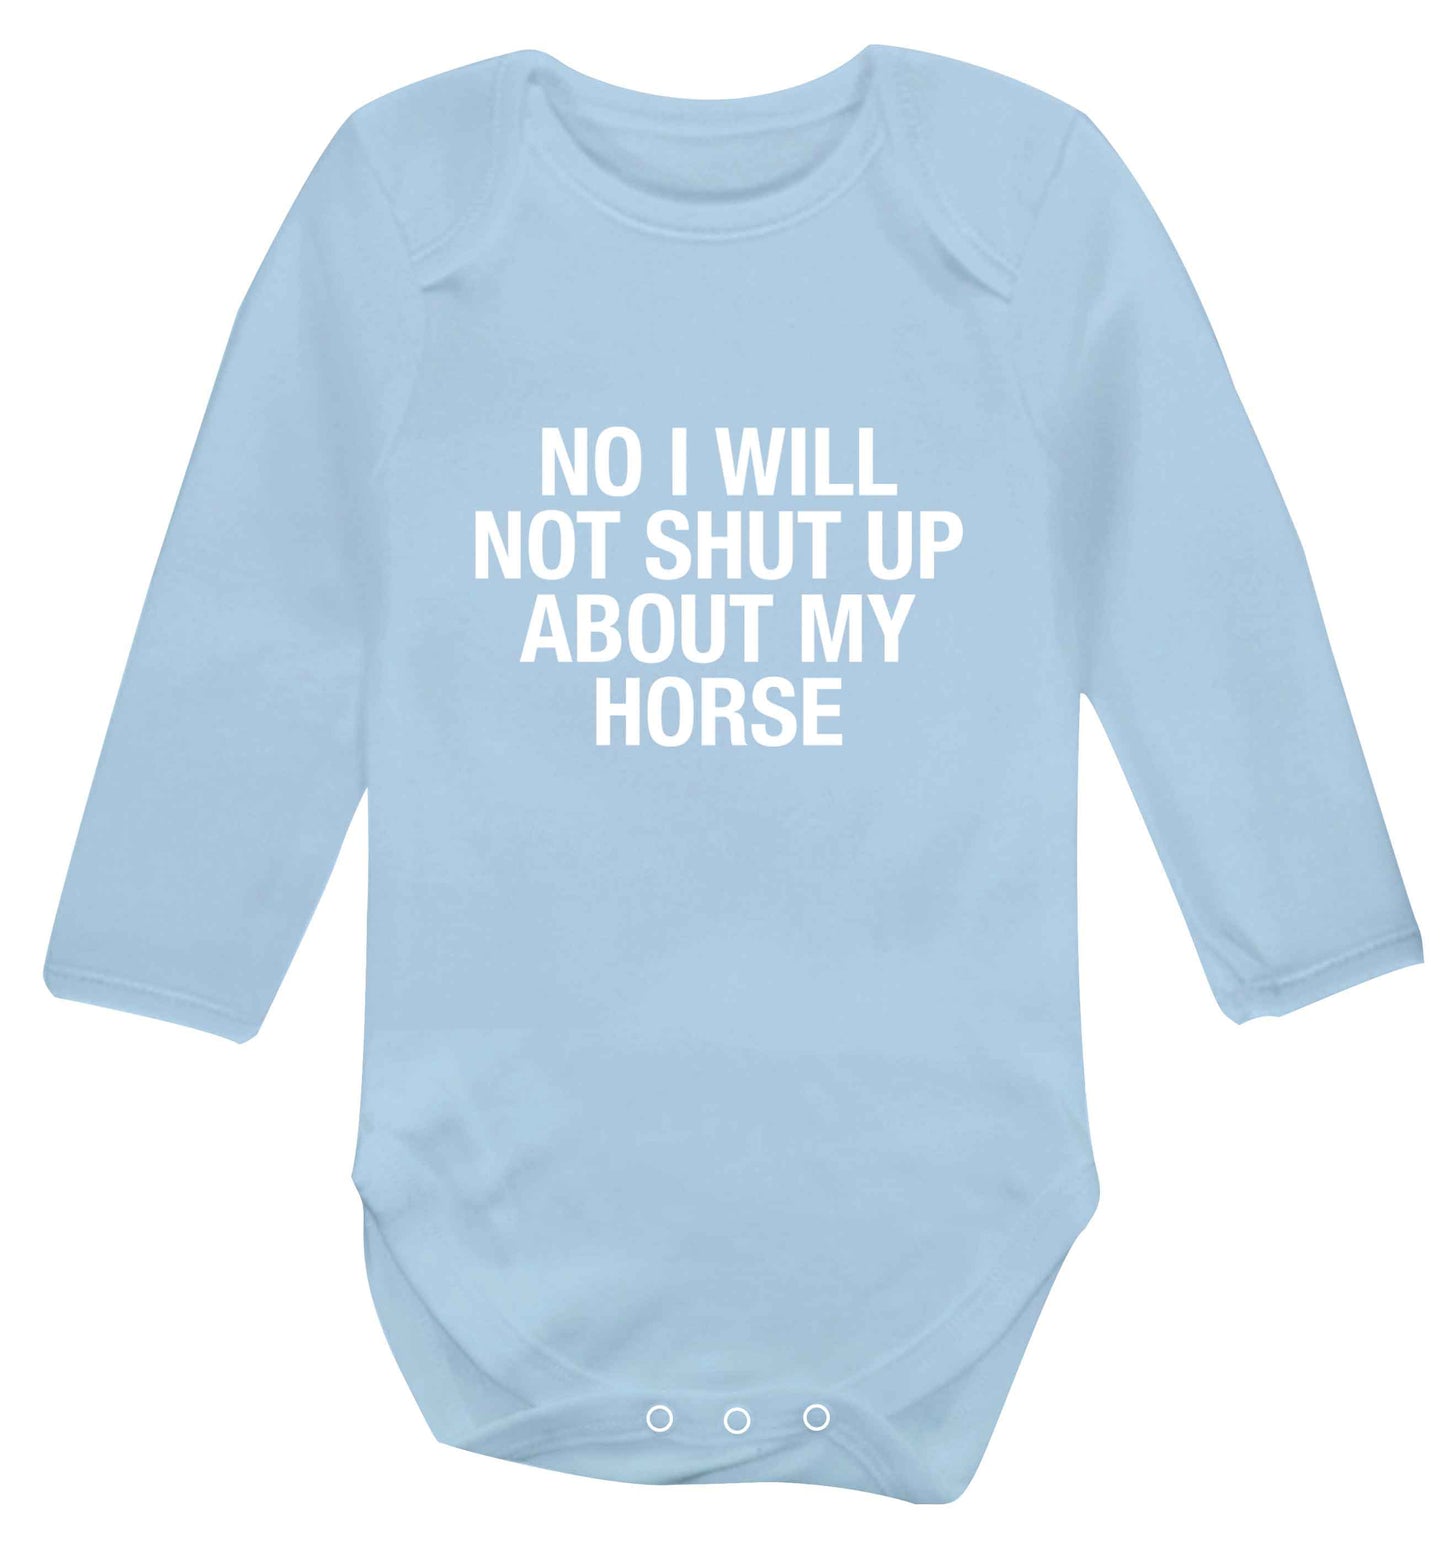 Warning may start talking about horses baby vest long sleeved pale blue 6-12 months